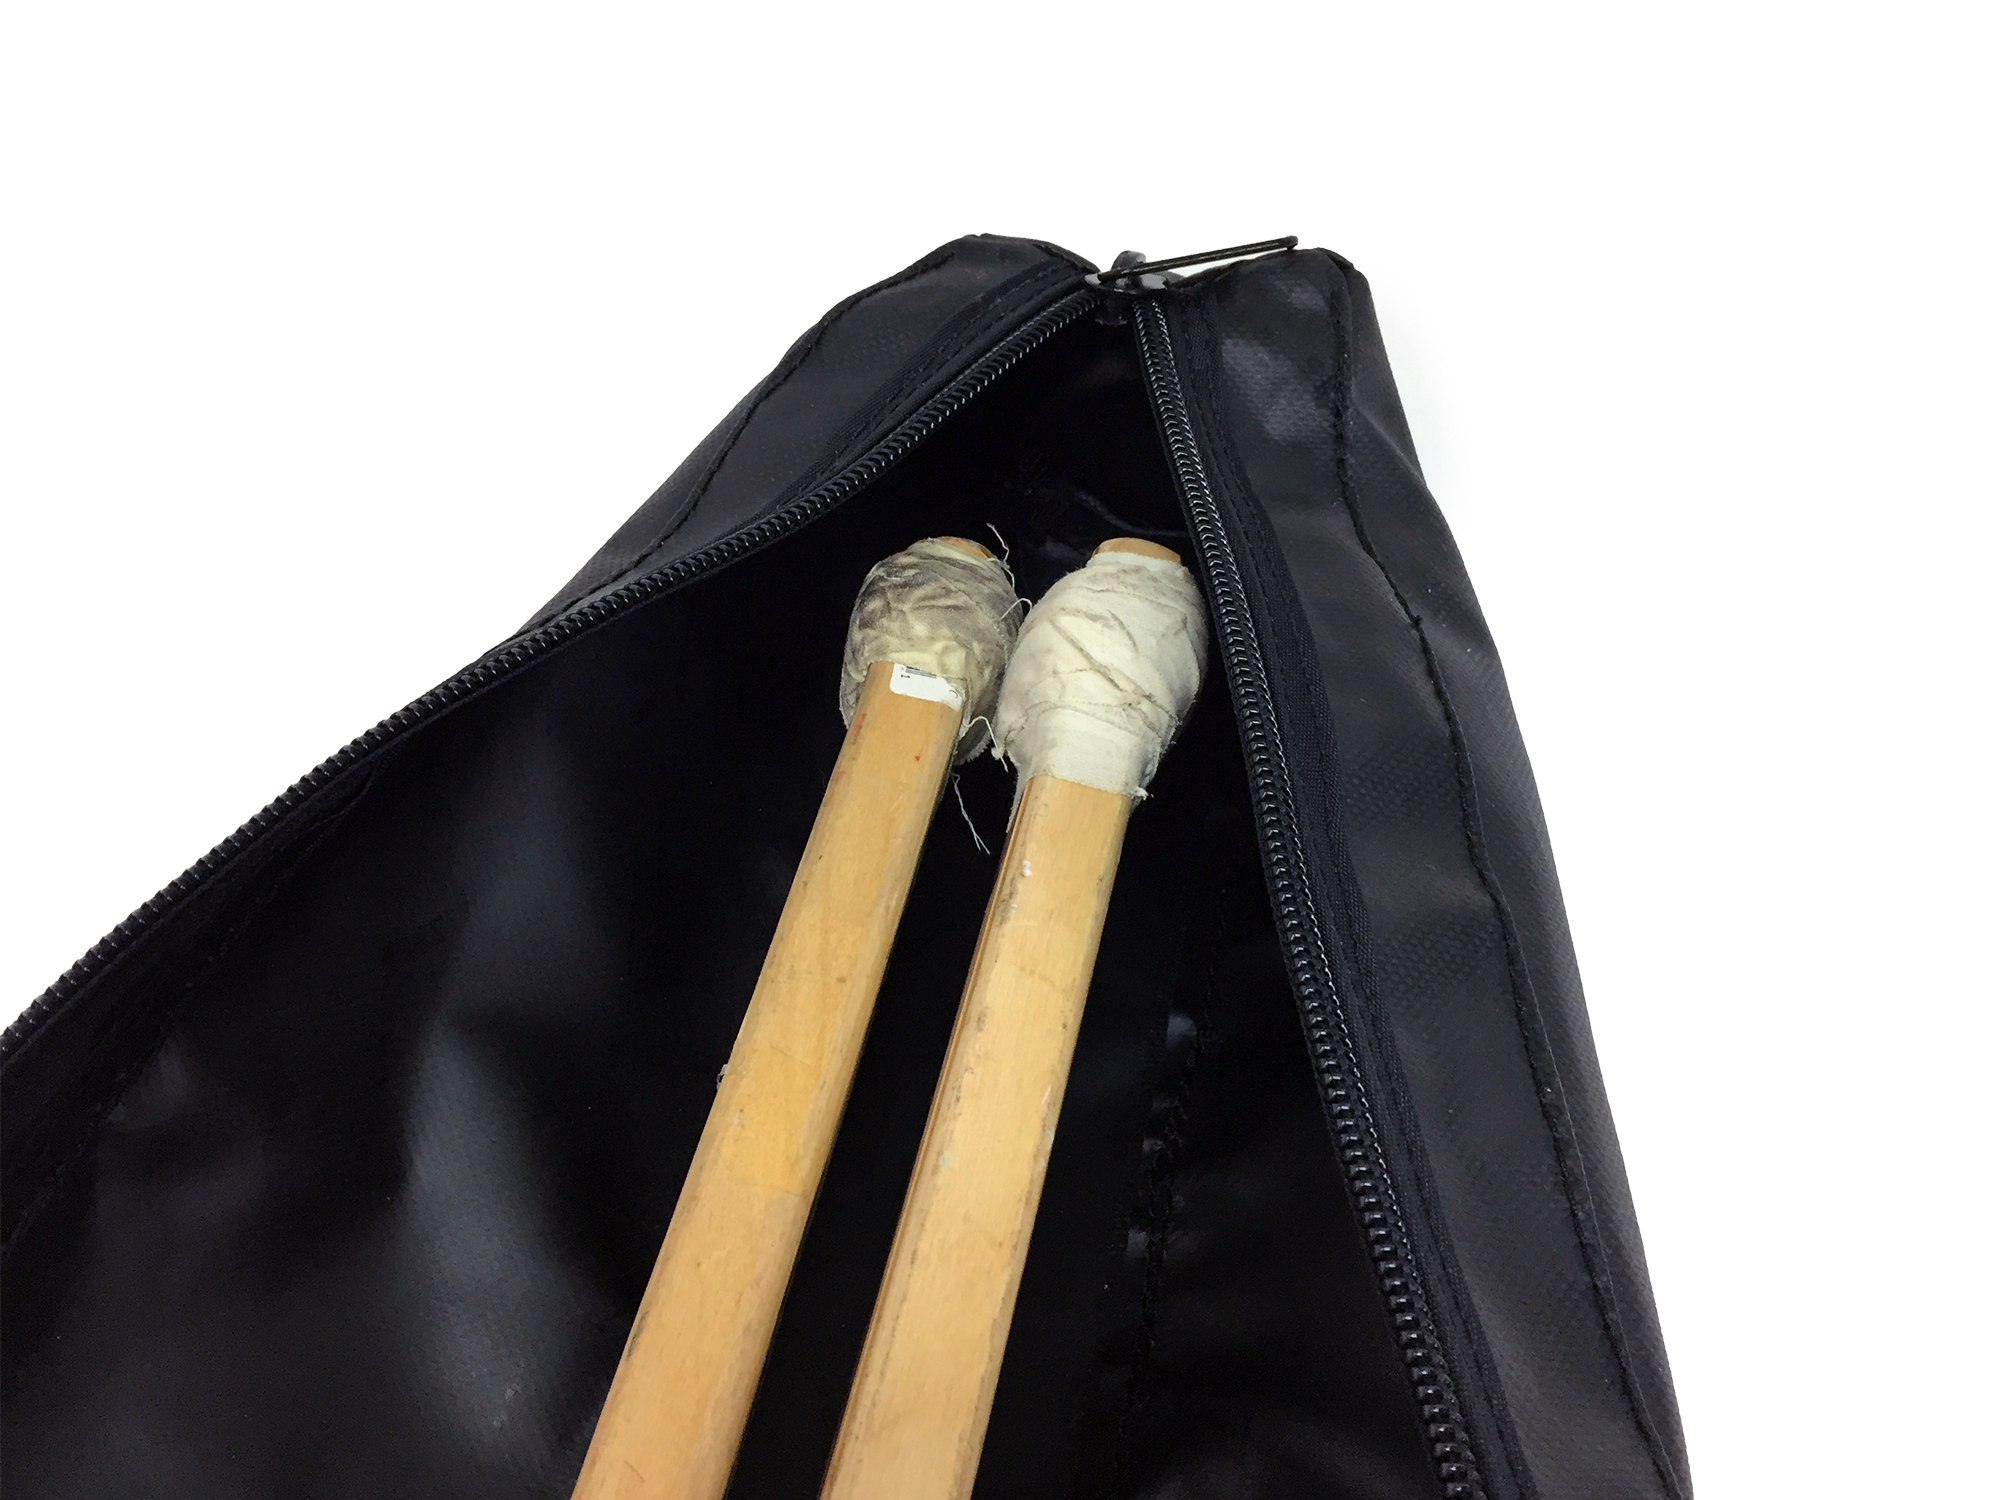 Two sticks in bag